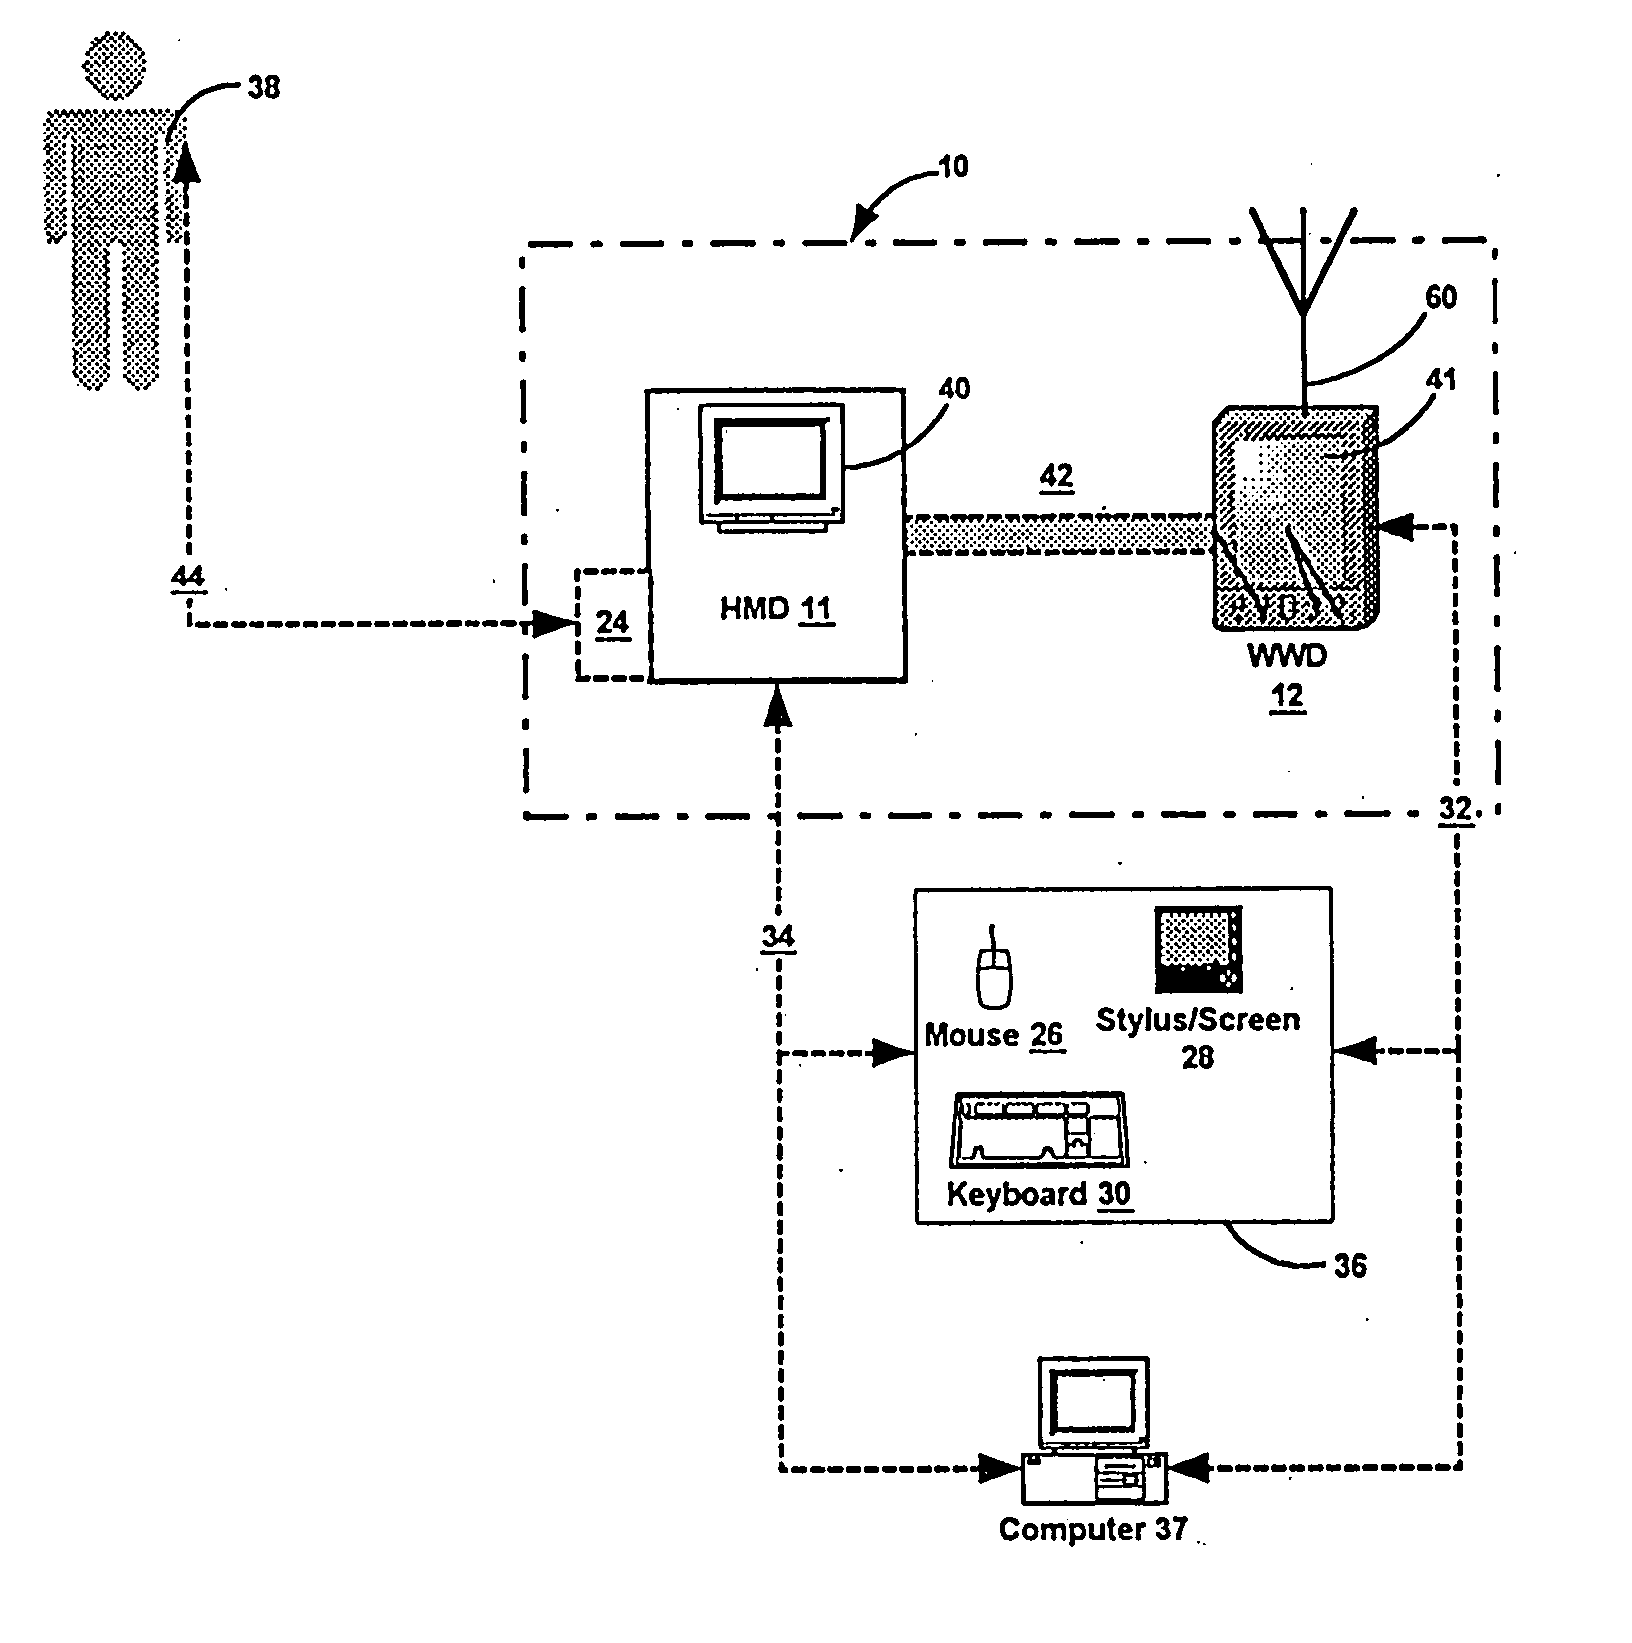 Method and apparatus for health and disease management combining patient data monitoring with wireless Internet connectivity